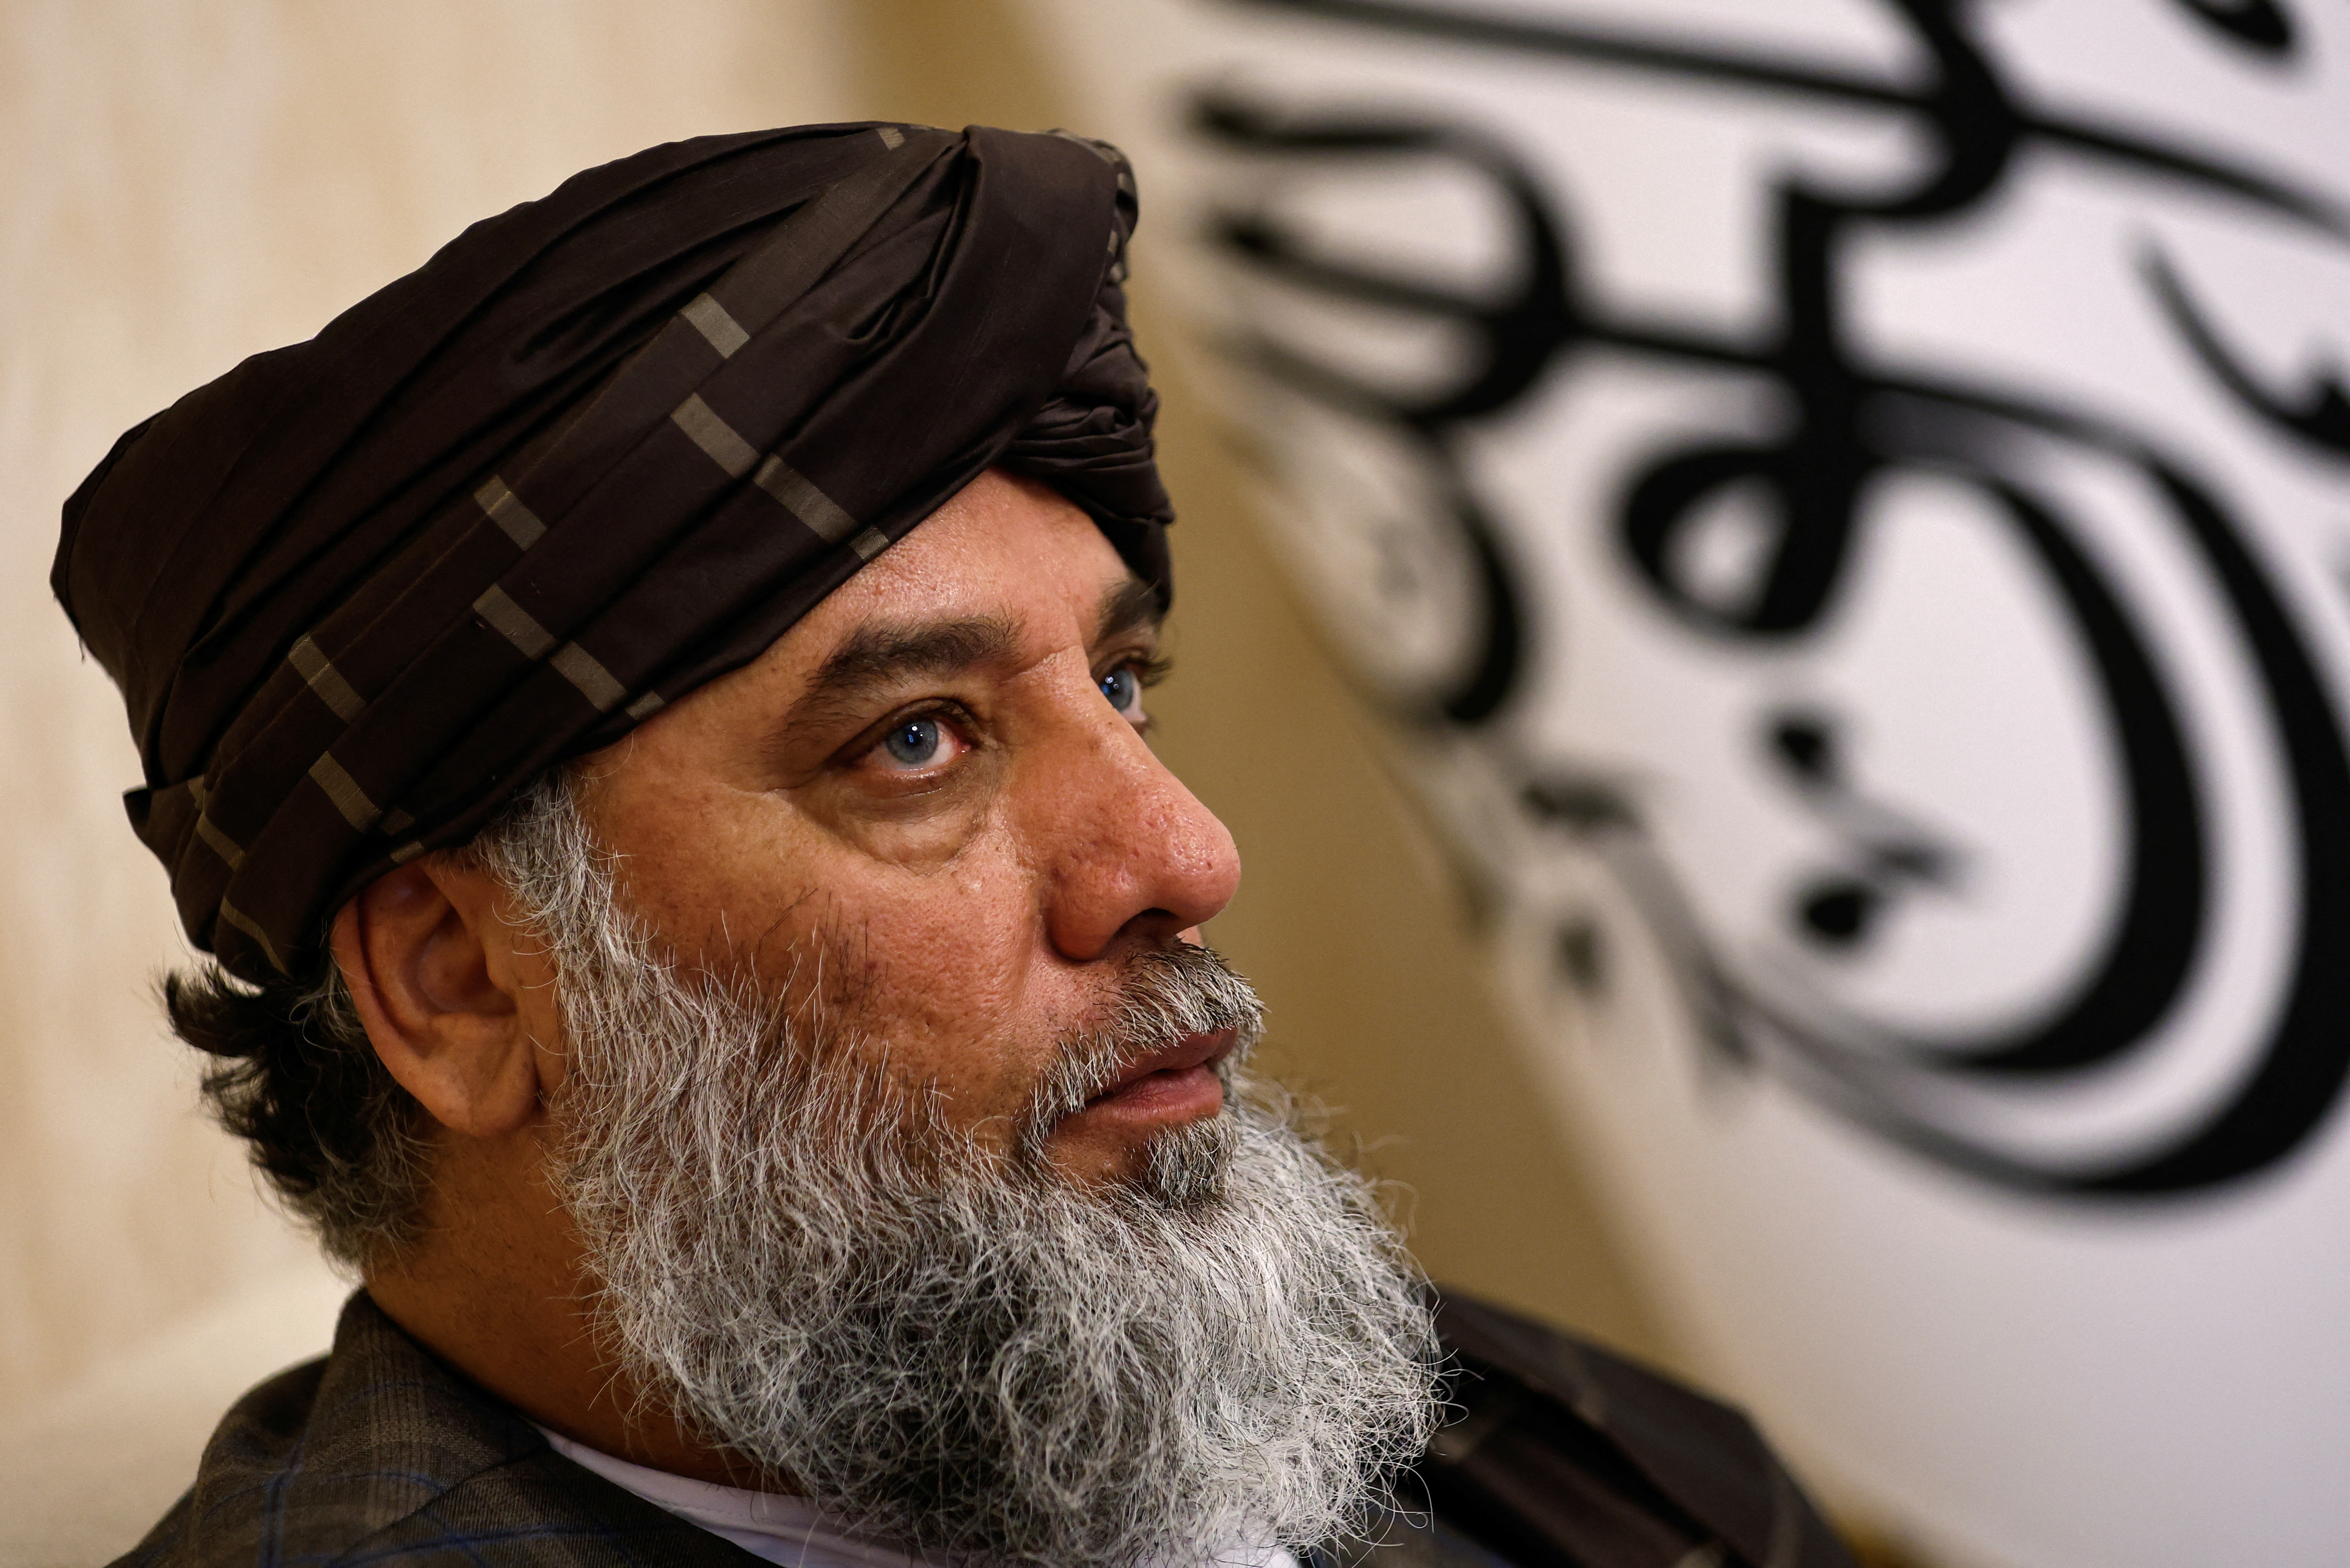 Taliban's acting commerce minister Haji Nooruddin Azizi speaks during an interview with Reuters, at the Embassy of Afghanistan in Beijing